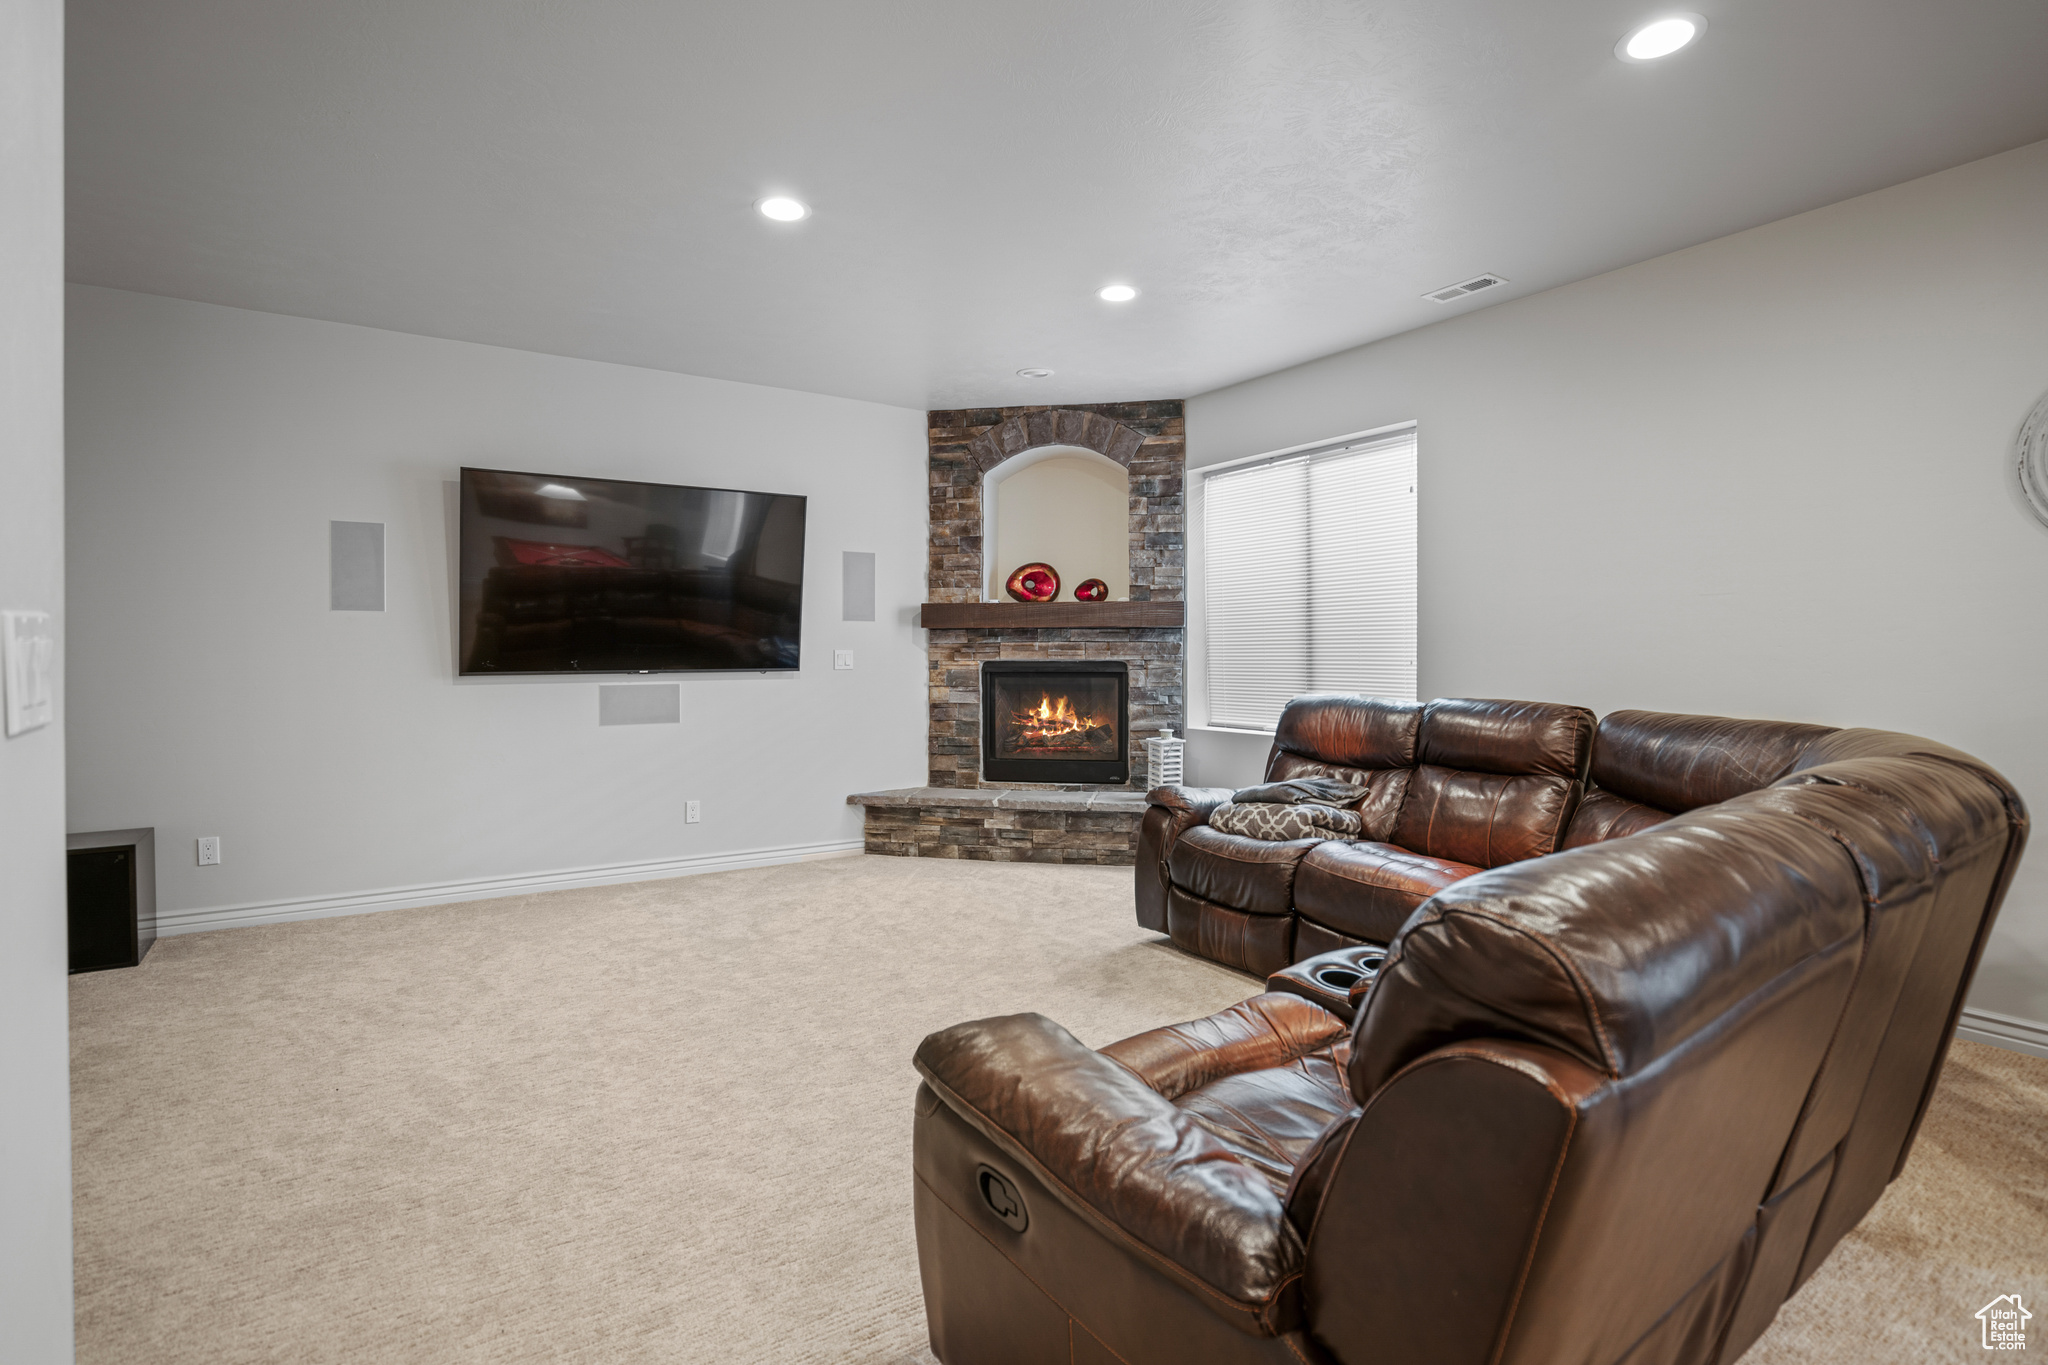 Carpeted living room with a stone fireplace